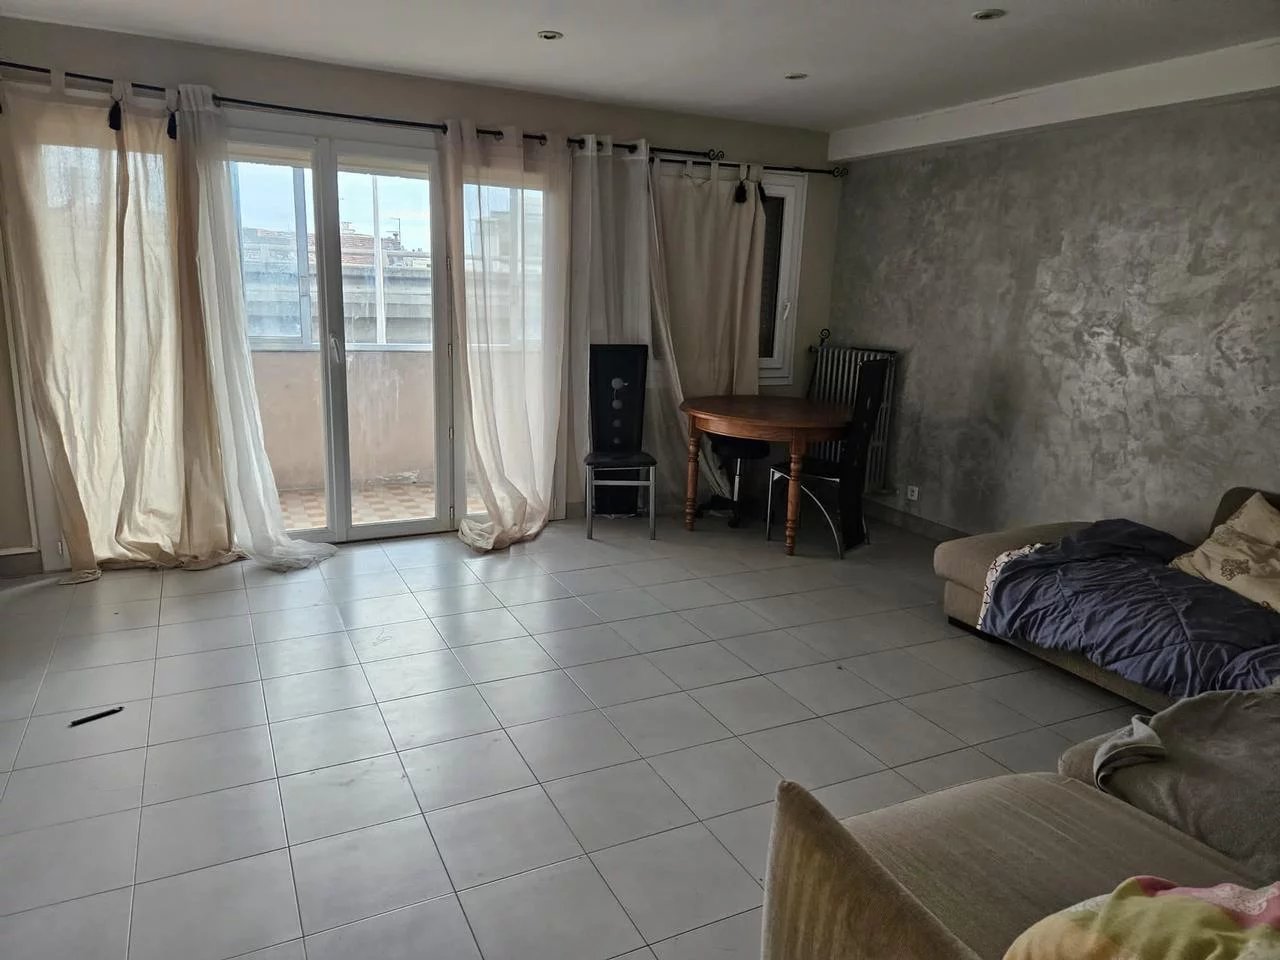 Appartement  2 Rooms 58m2  for sale   165 000 €